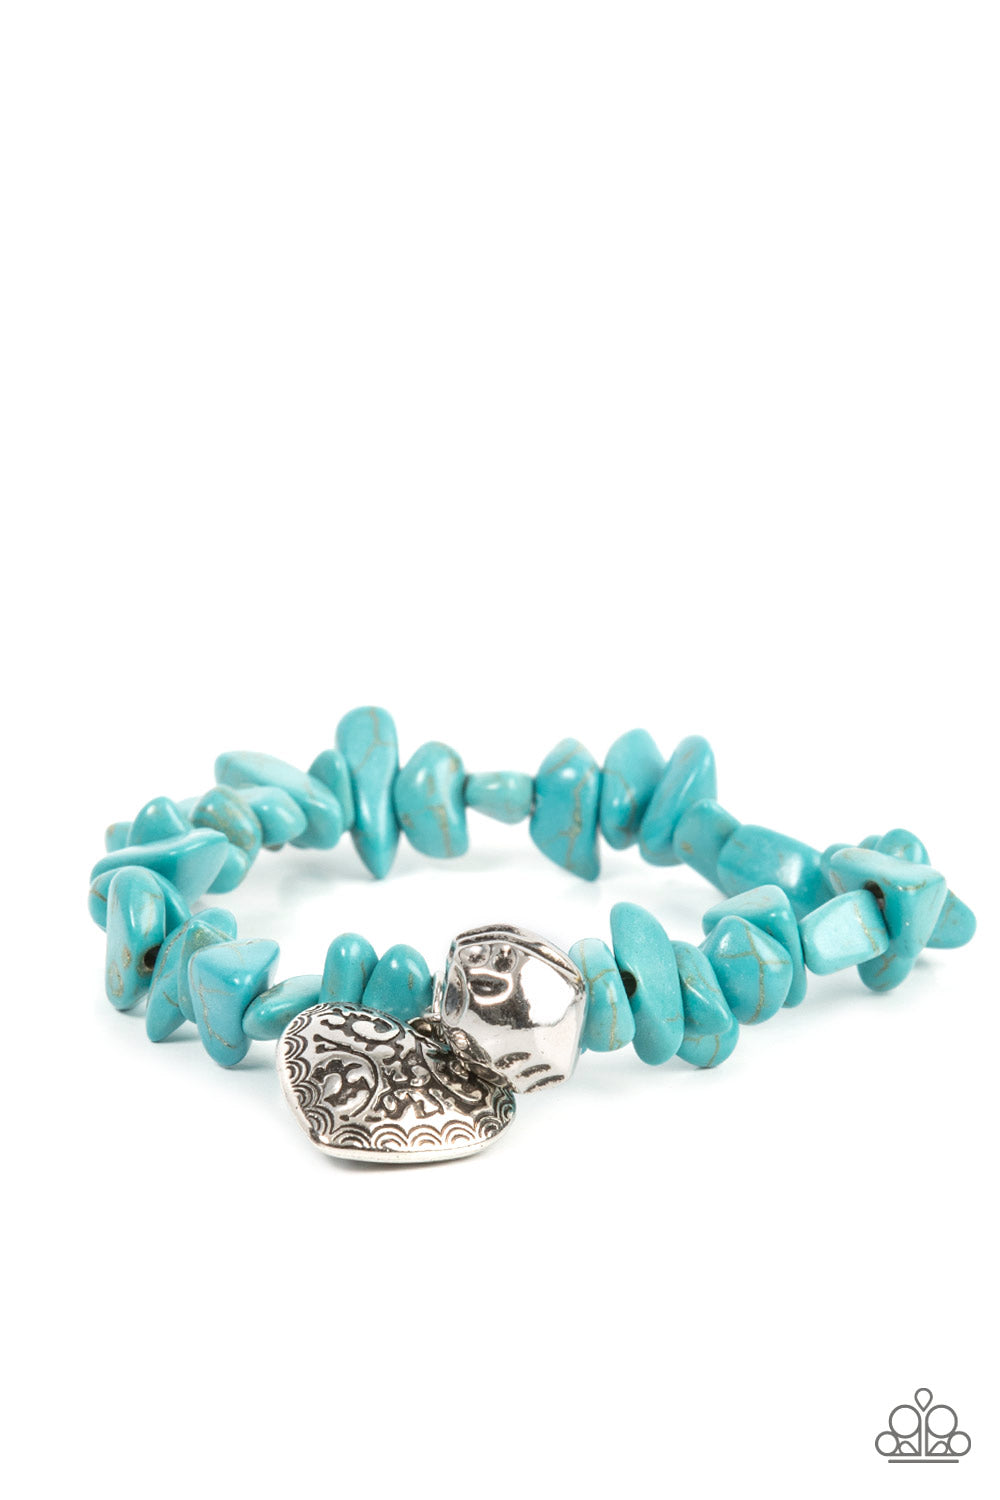 Paparazzi Love You to Pieces - Blue Bracelet - A Finishing Touch Jewelry